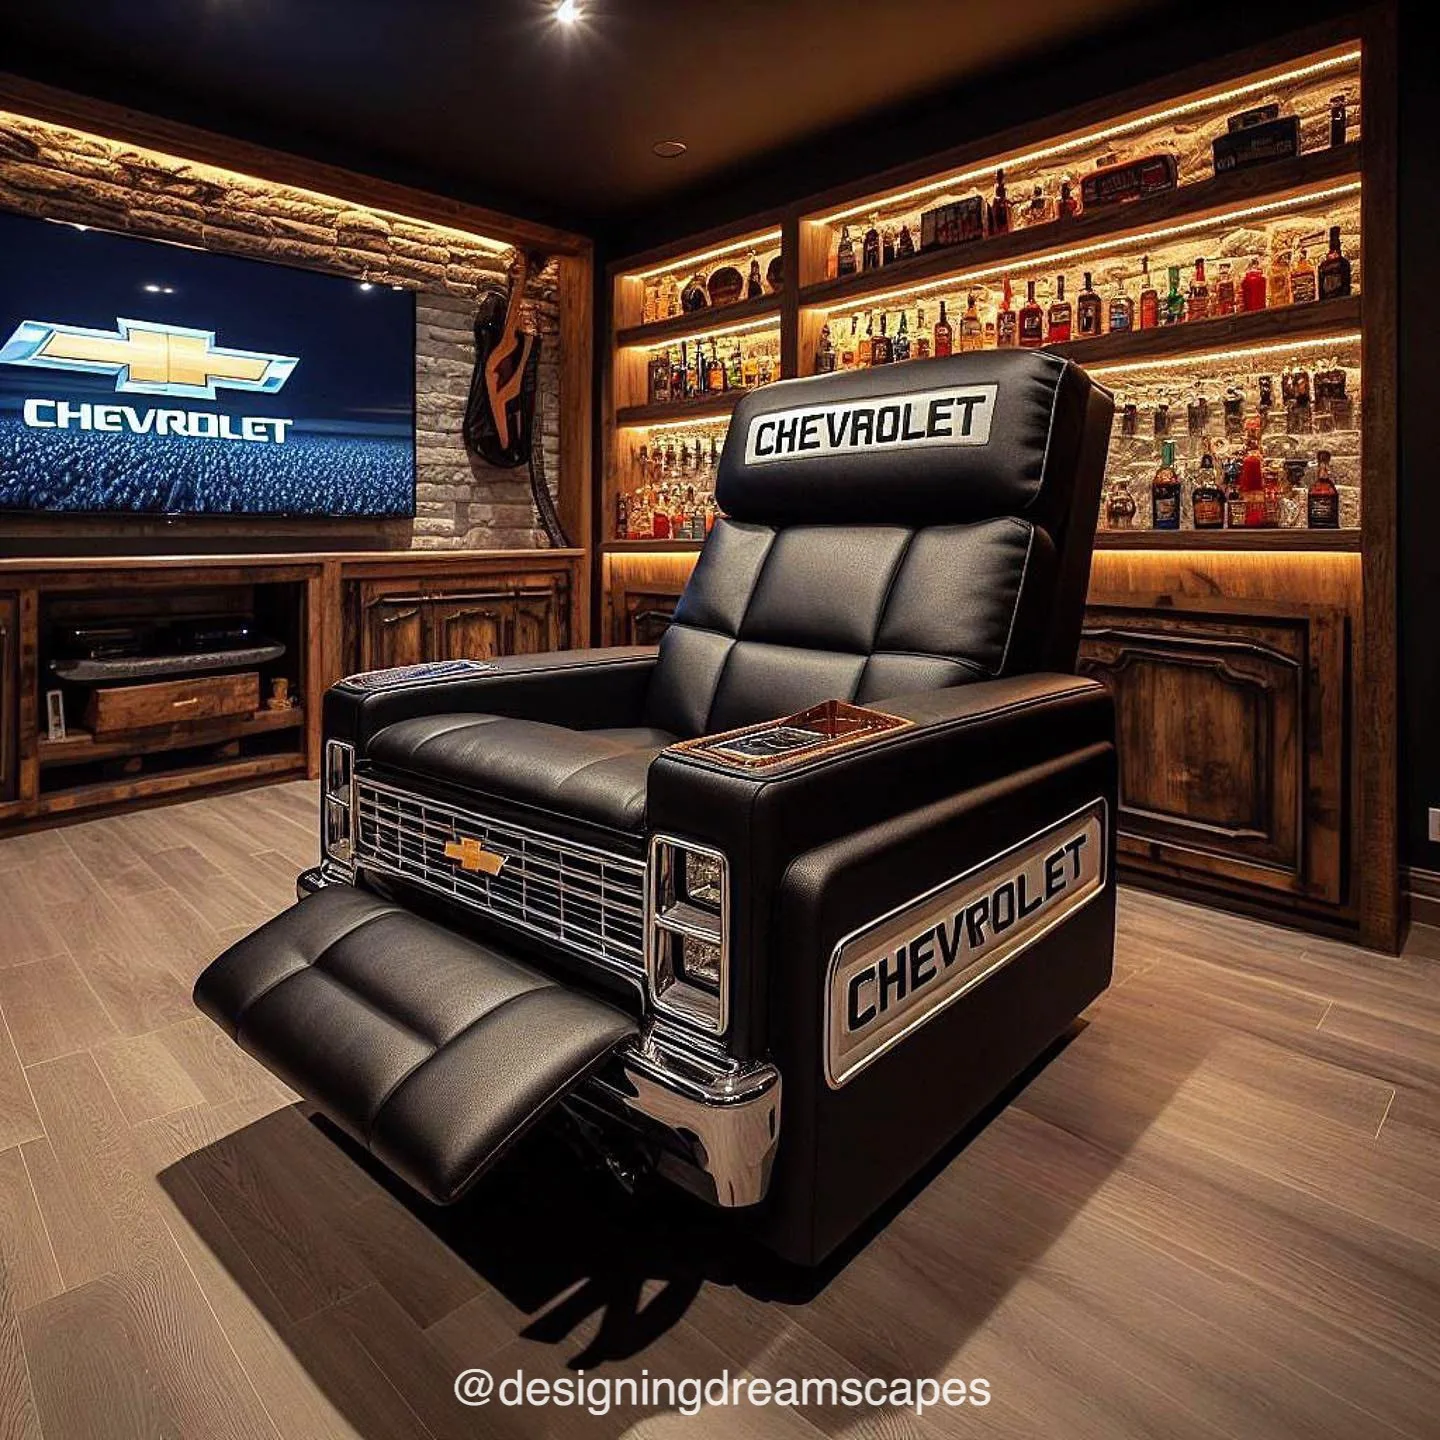 Chevrolet Inspired Recliner: Cruise in Comfort at Home